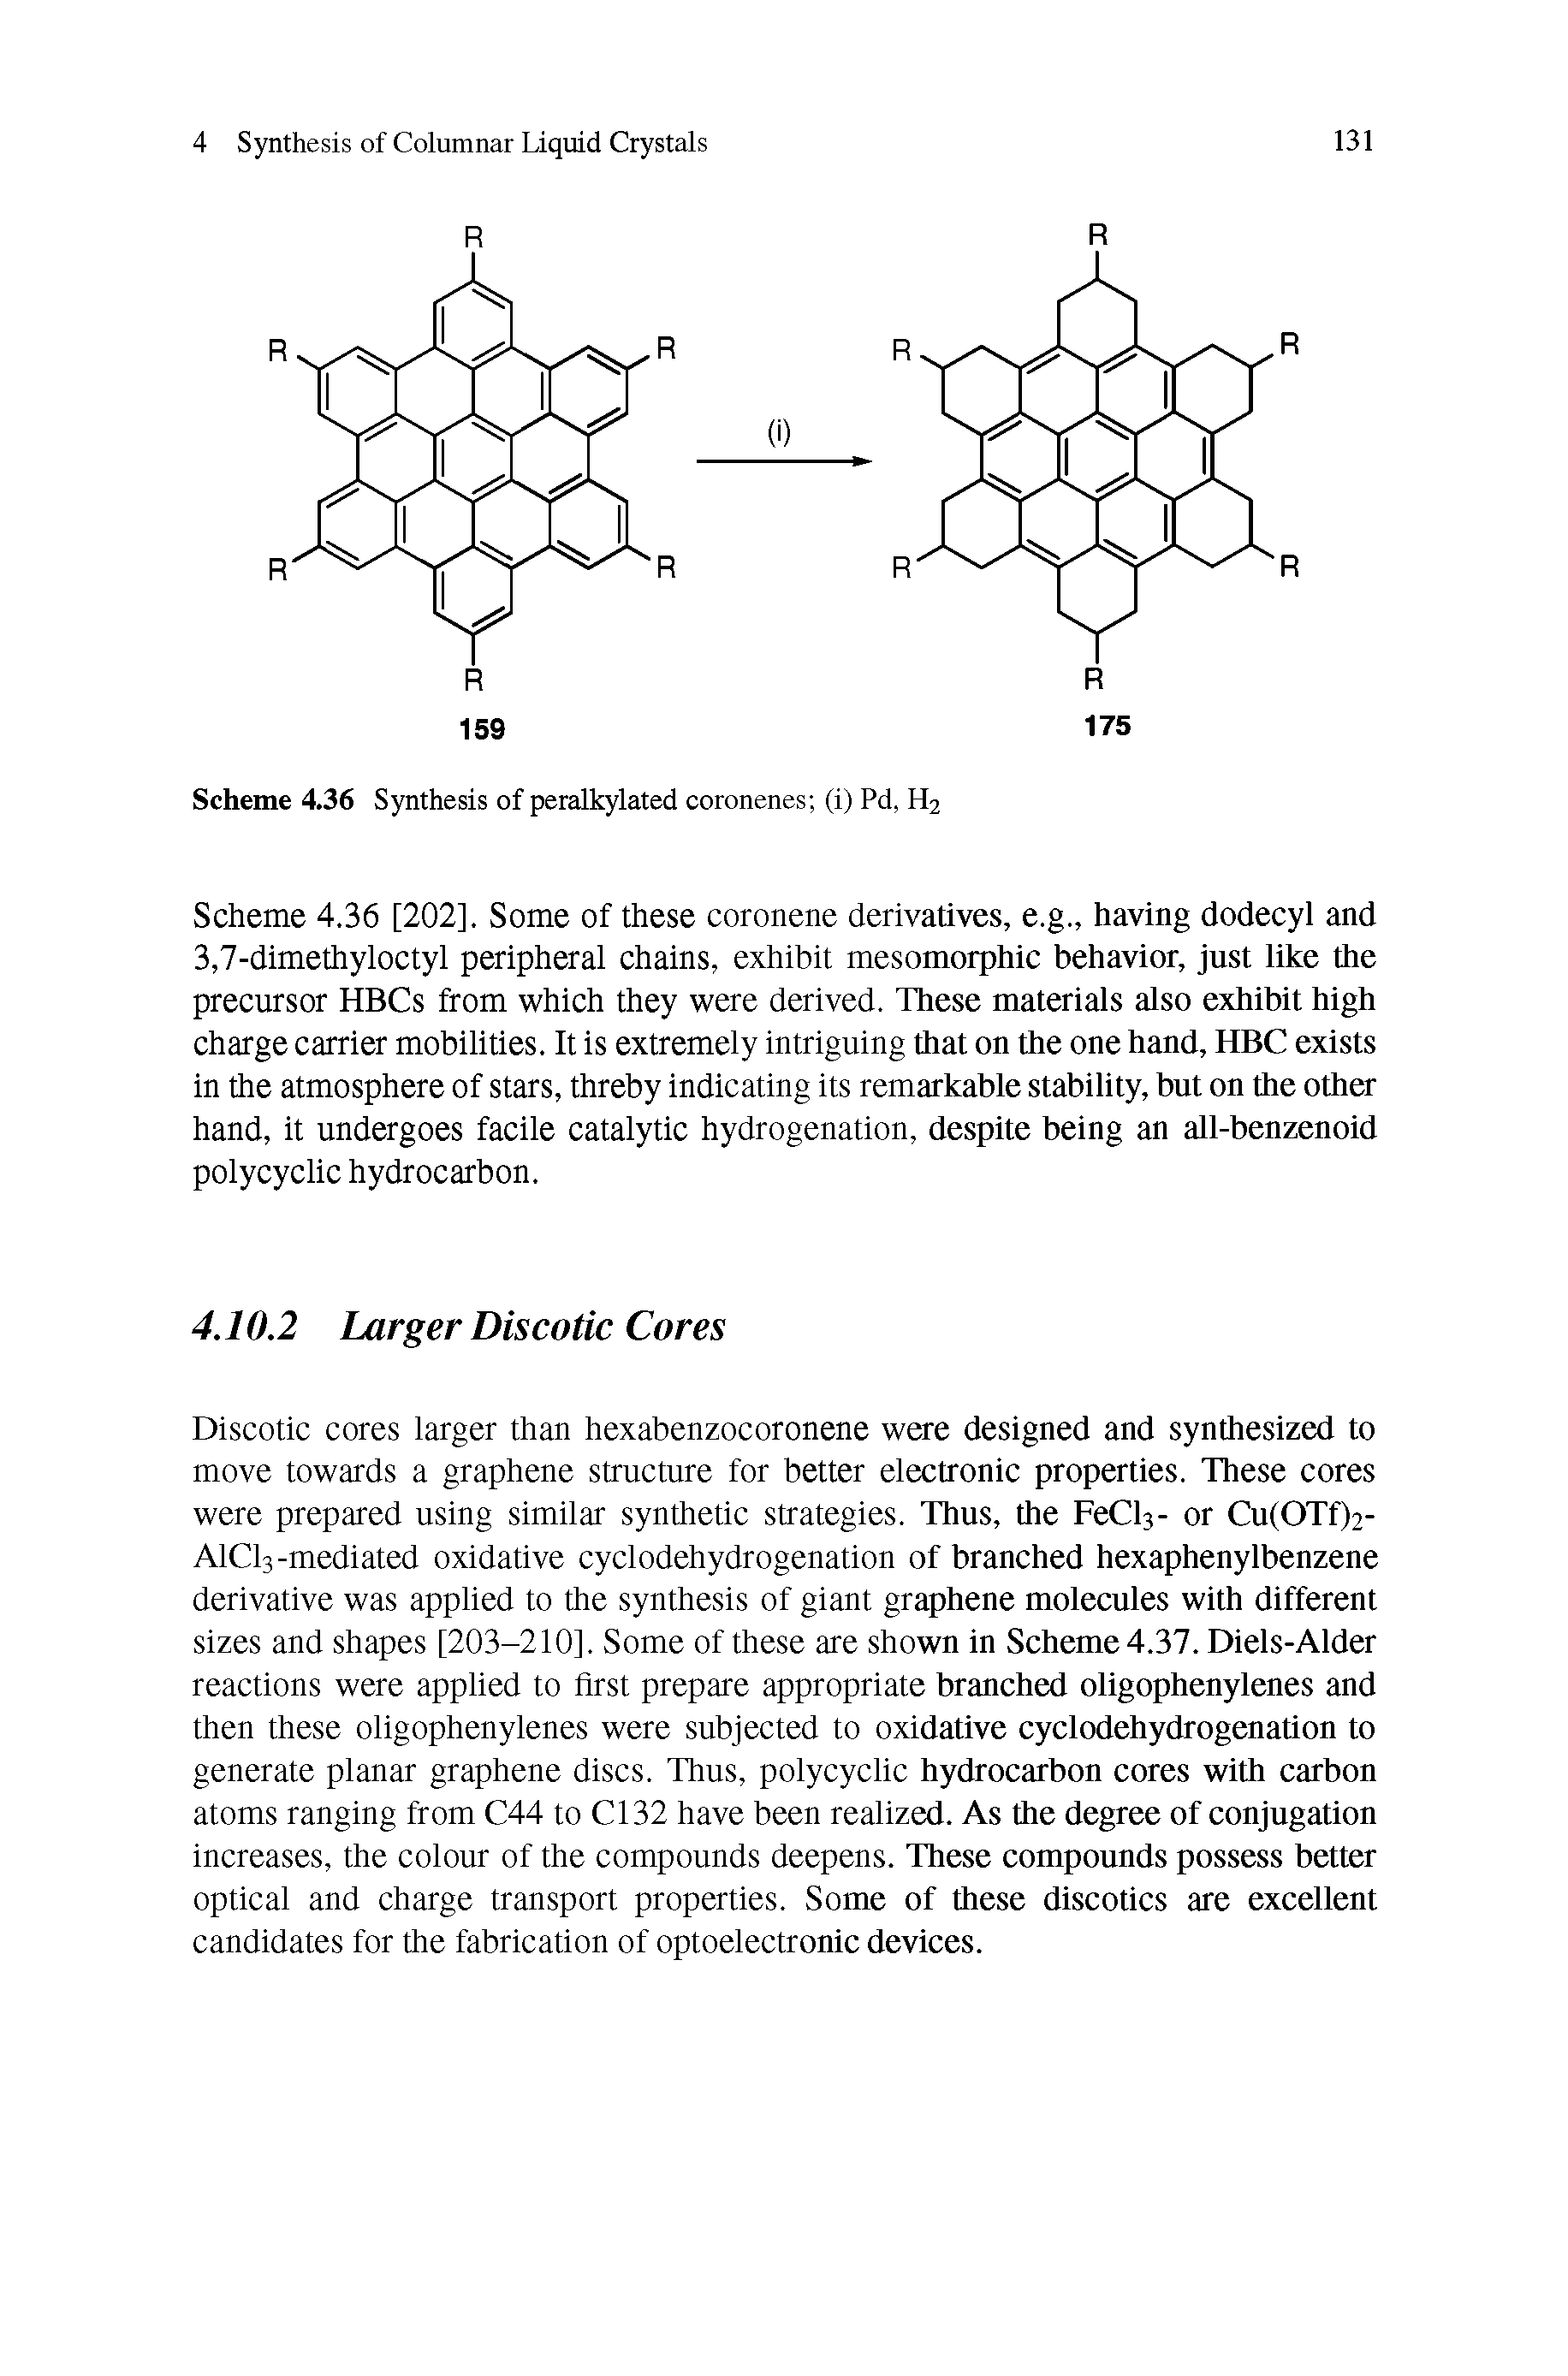 Scheme 4.36 [202], Some of these coronene derivatives, e.g., having dodecyl and 3,7-dimethyloctyl peripheral chains, exhibit mesomorphic behavior, just like the precursor HBCs from which they were derived. These materials also exhibit high charge carrier mobilities. It is extremely intriguing that on the one hand, HBC exists in the atmosphere of stars, threby indicating its remarkable stability, but on the other hand, it undergoes facile catalytic hydrogenation, despite being an all-benzenoid polycyclic hydrocarbon.